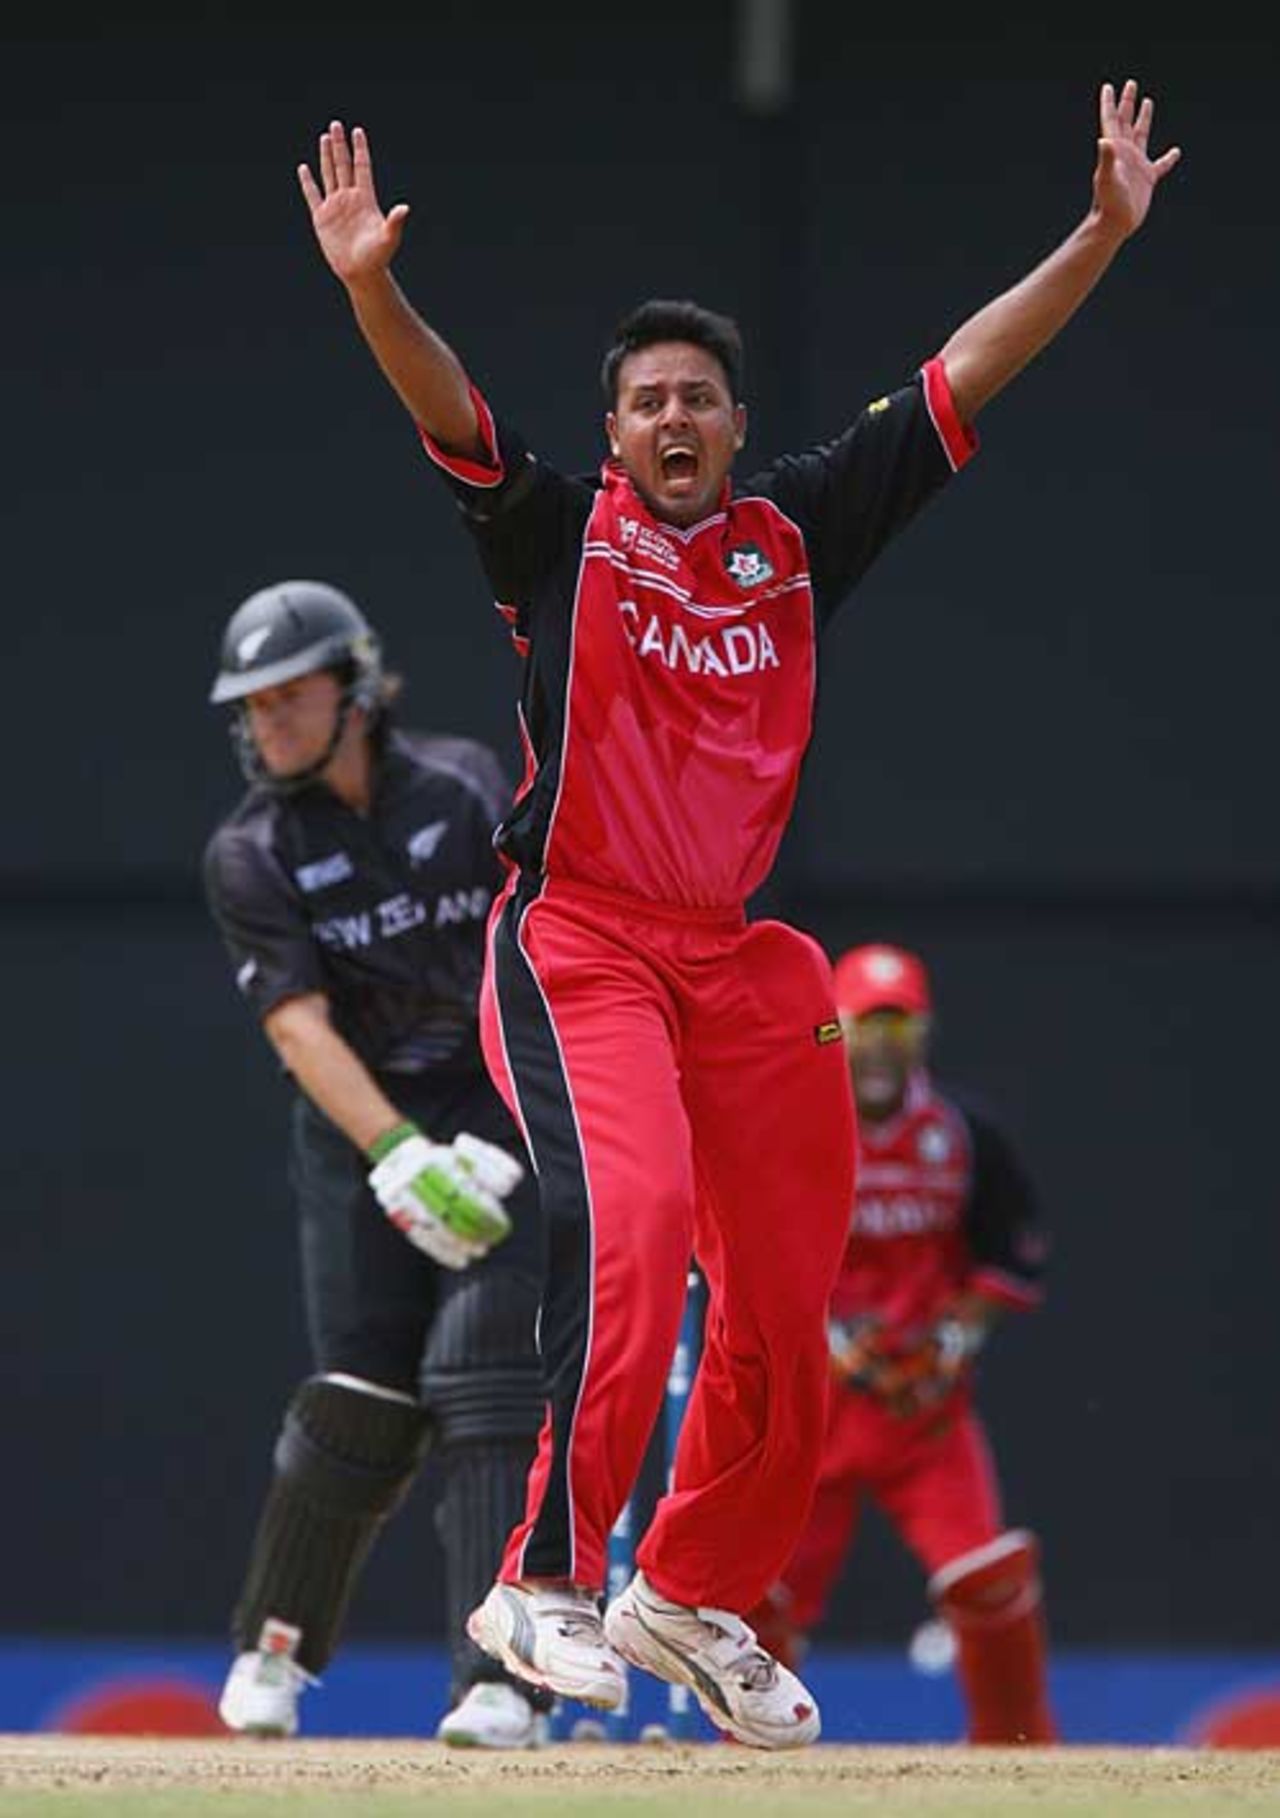 Umar Bhatti belts an early appeal against Lou Vincent, Canada v New Zealand, Group C, St Lucia, March 22, 2007